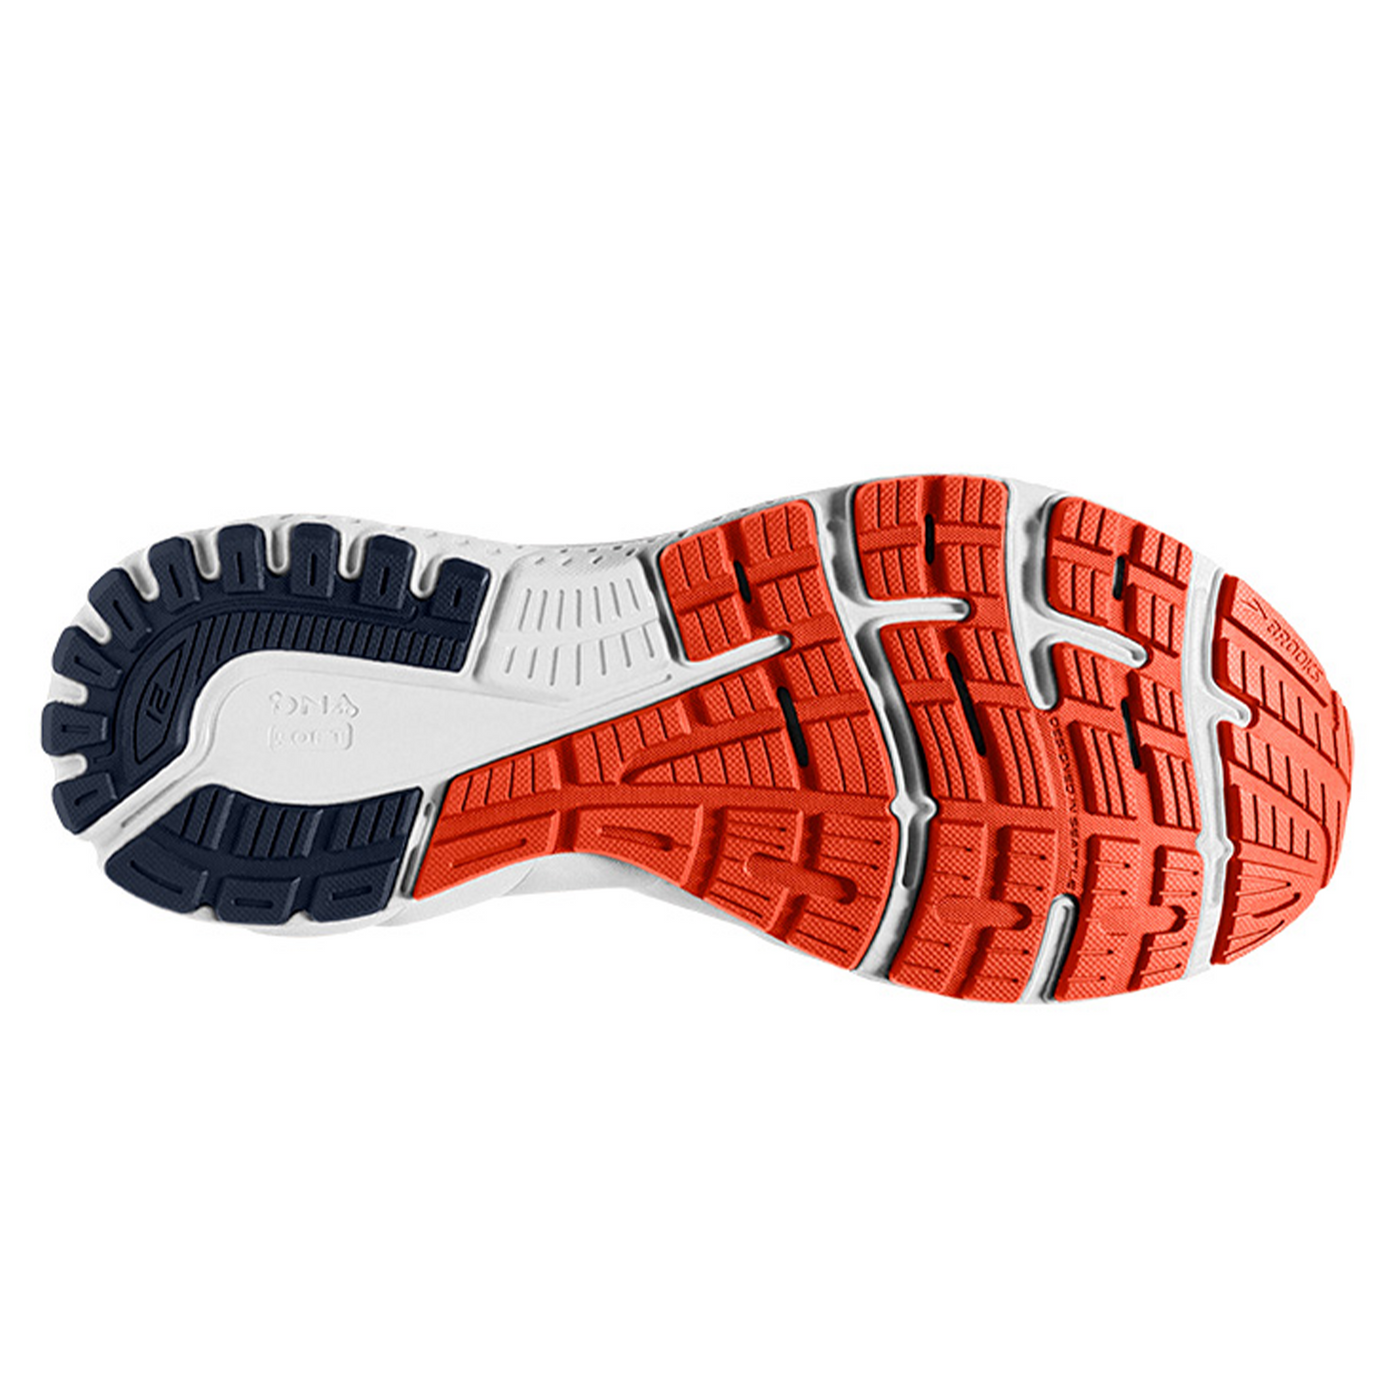 Brooks Mens Adrenaline GTS 21 - Navy/Red Clay/Gray - Stability